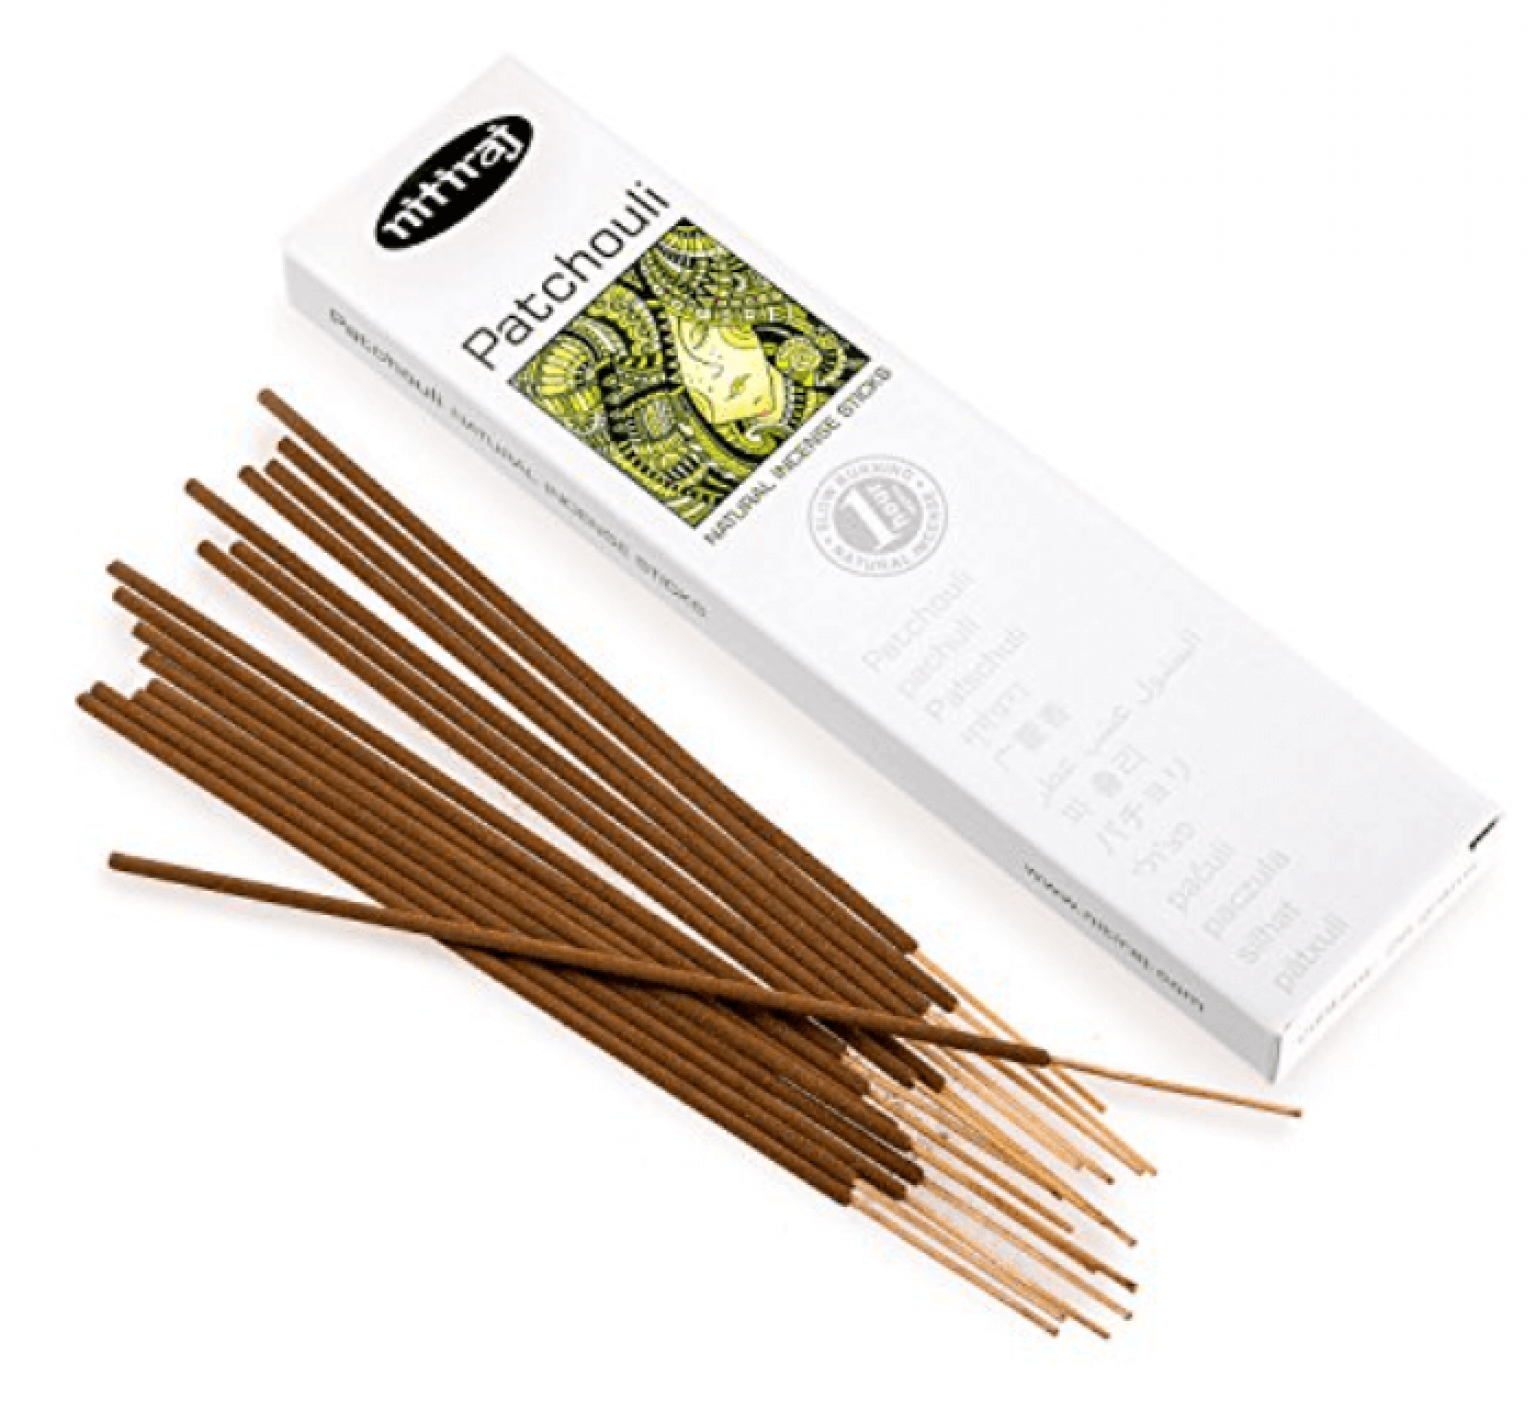 Incense sticks | Where to buy incense sticks in 2021 | CTC